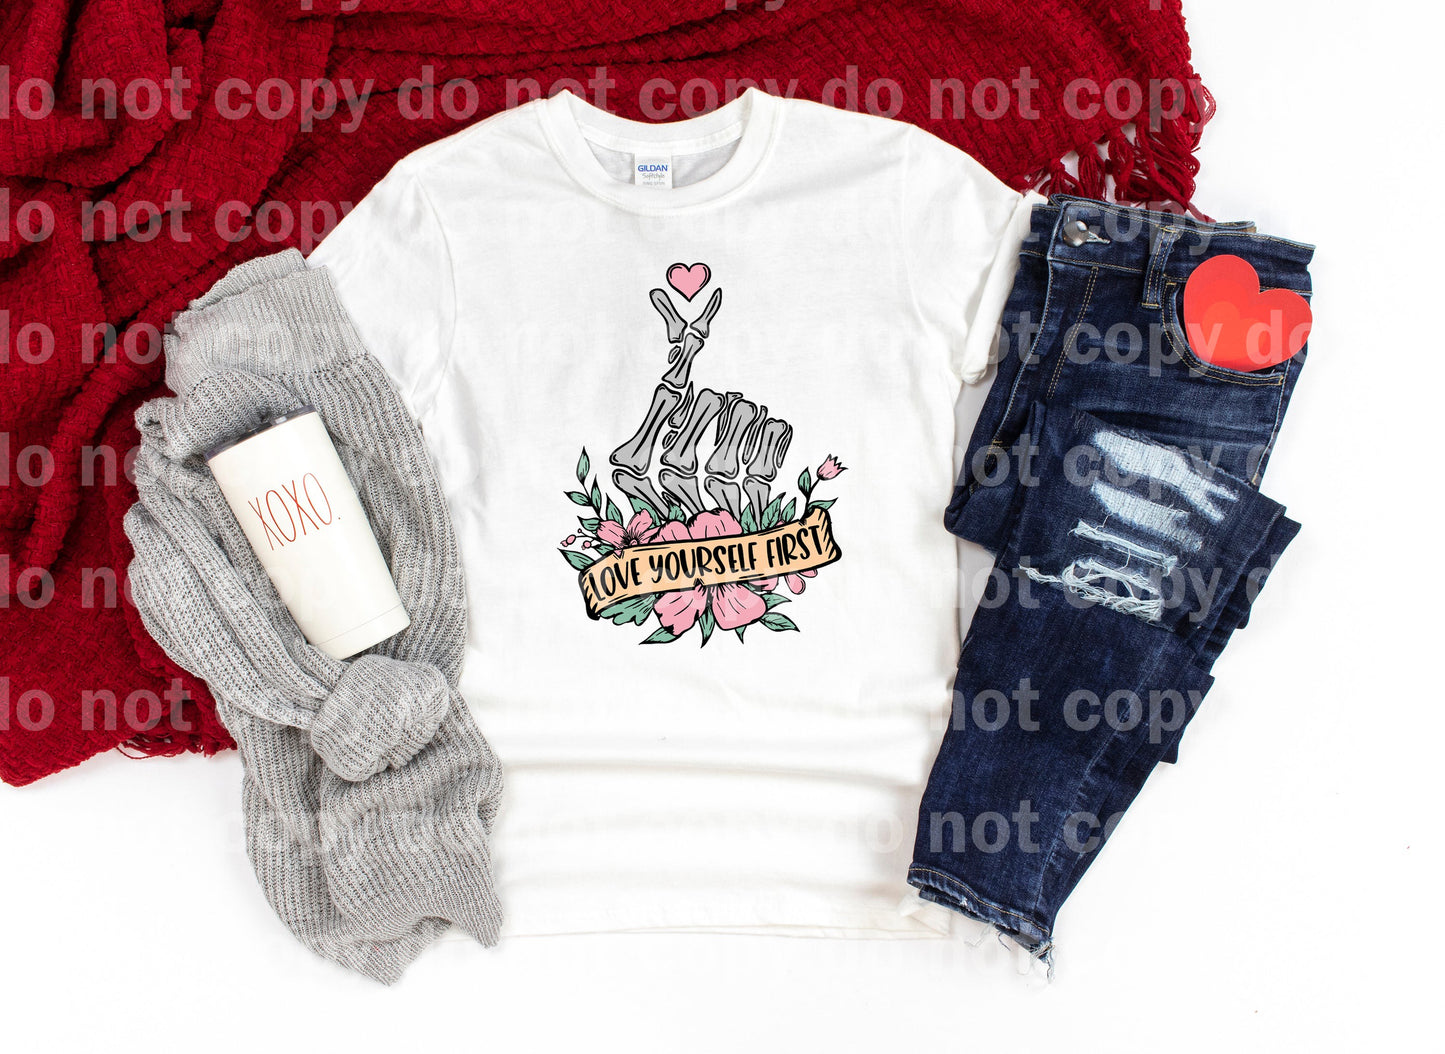 Love Yourself First Heart Finger Skellie Full Color/One Color with Pocket Option Dream Print or Sublimation Print